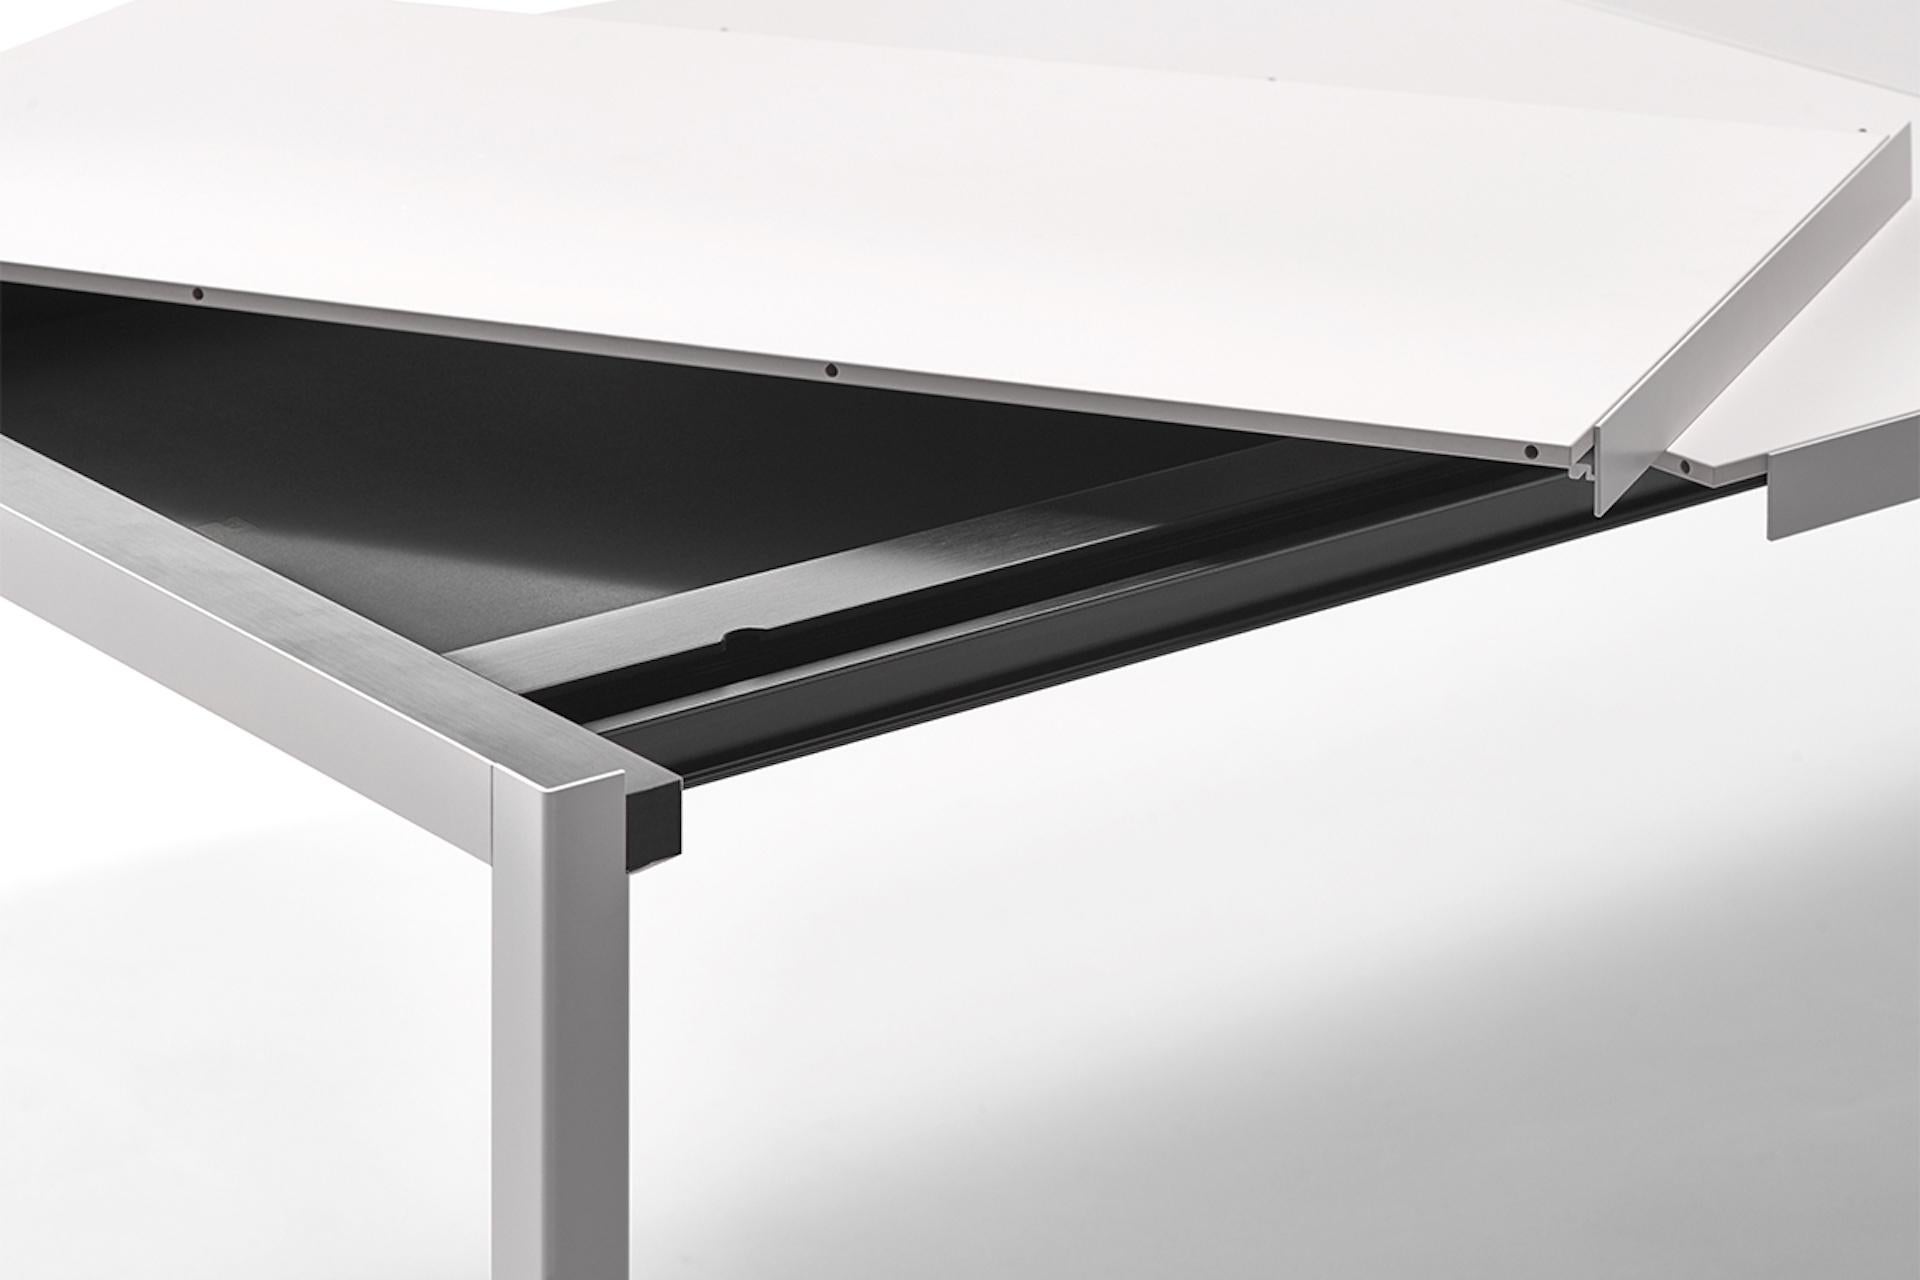 1 extension top
(+ 50 cm)
D100 real size D98
The new range of Extension tables excellently combines the aesthetics of MDF Italia table with the functionality of a an extension product, thus meeting market demands.
The system’s flexibility is